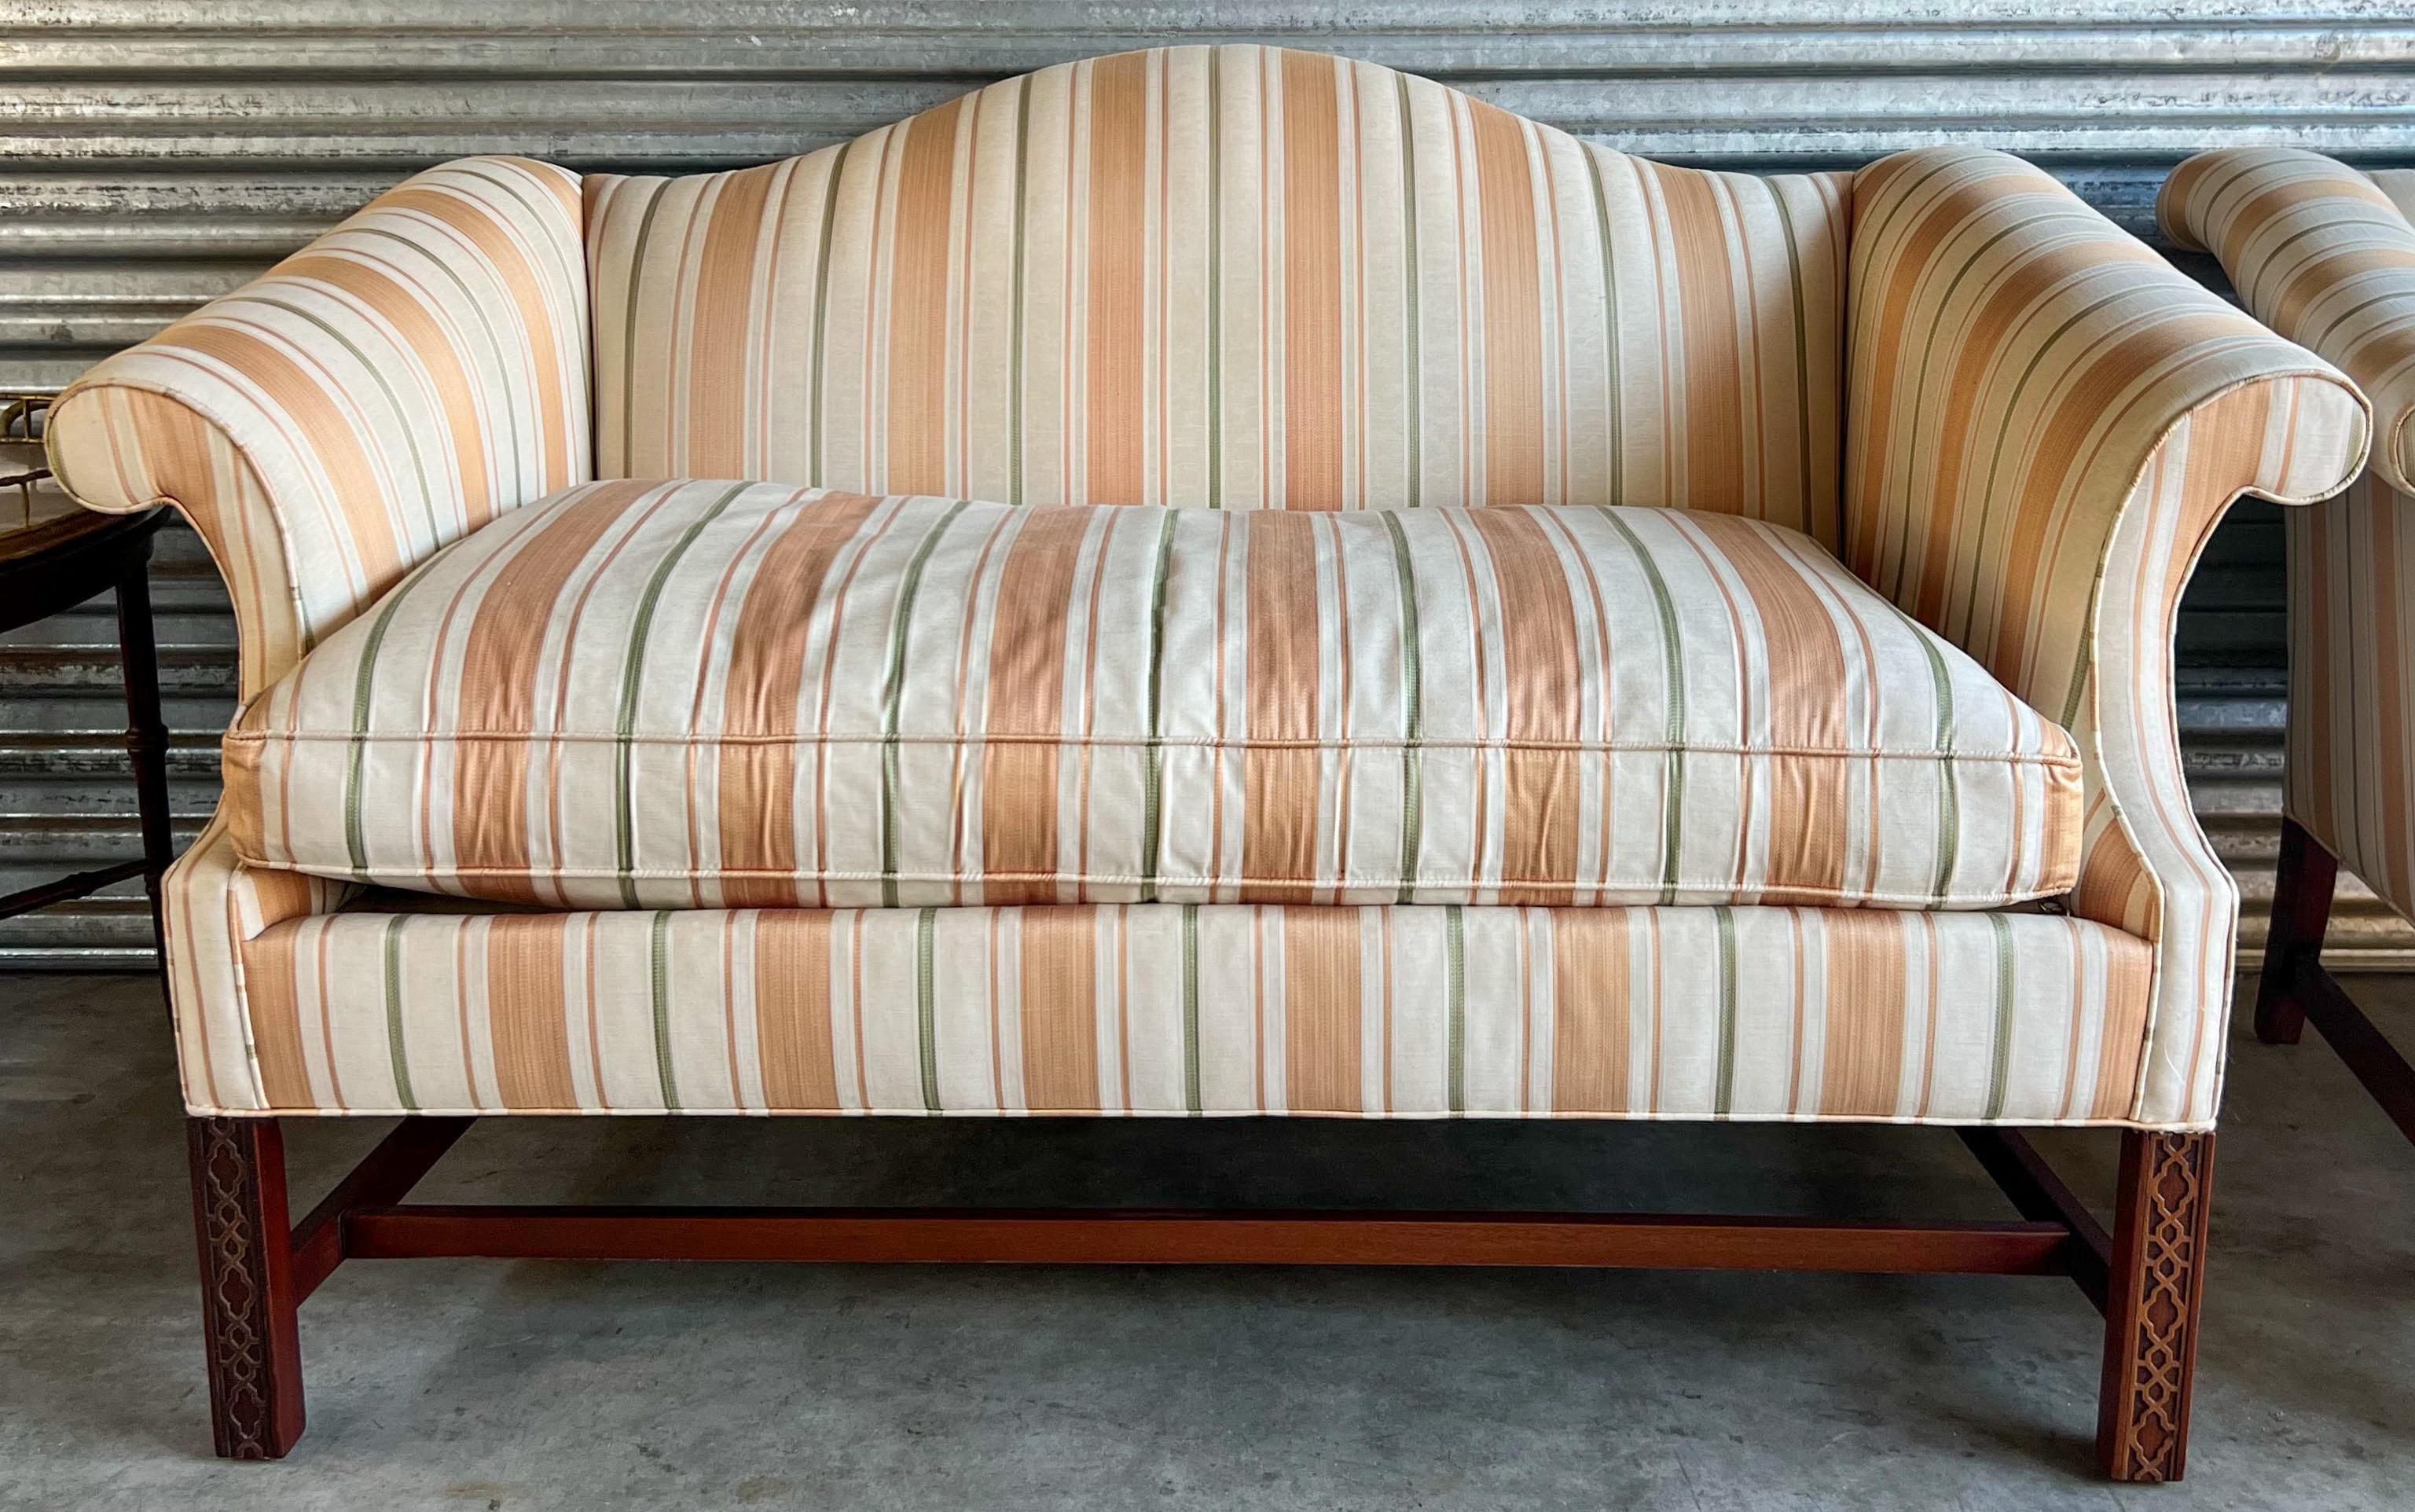 This is a pair of 20th century Chinese Chippendale style settees by the American manufacturer, Southwood & Co. They are marked, and the vintage striped upholstery is in very good condition.